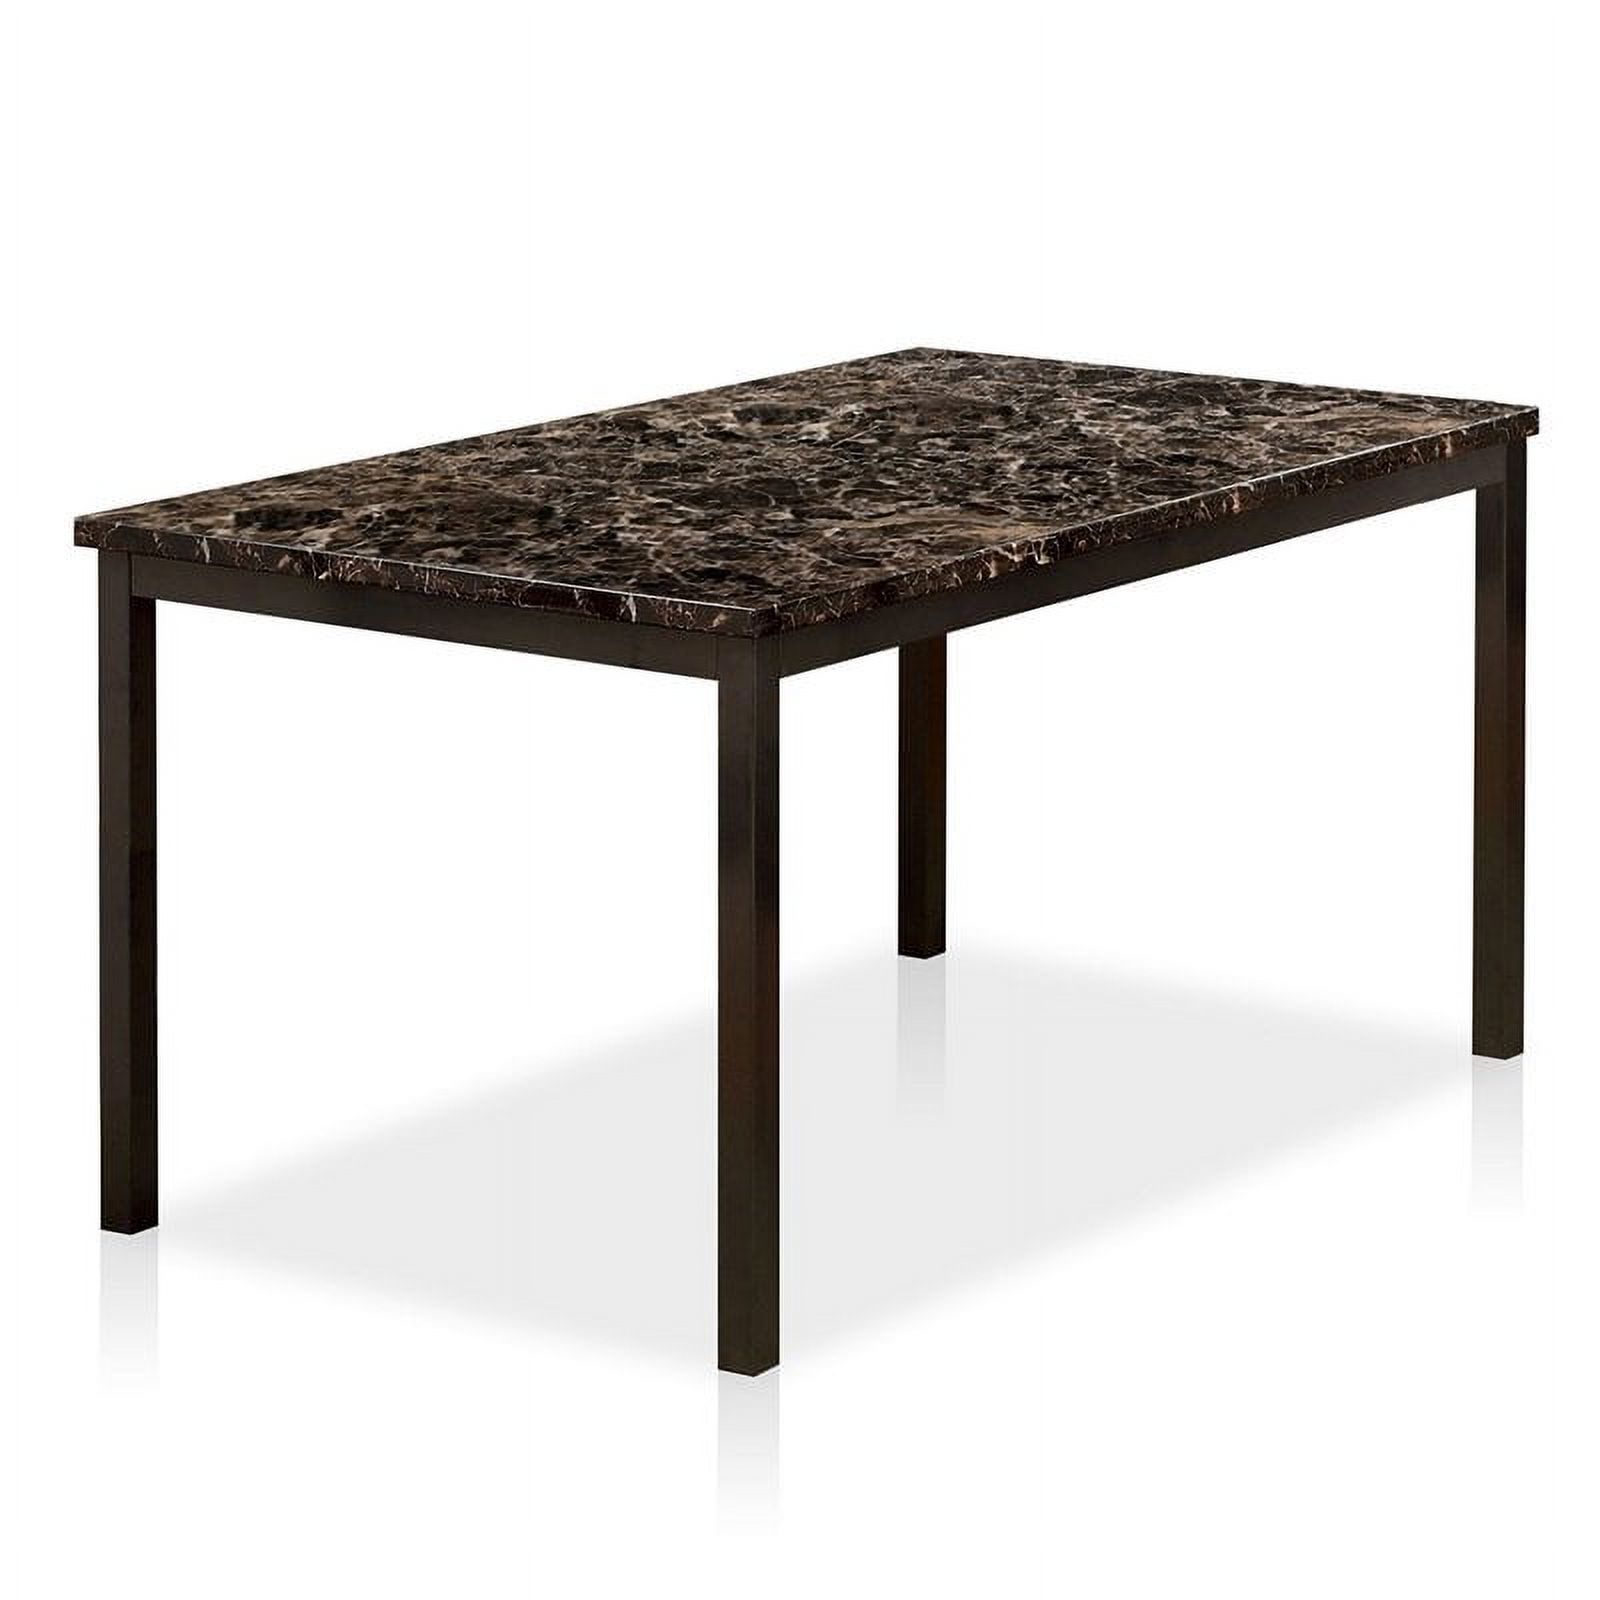 Furniture of America Maxson Transitional Metal 48-Inch Dining Table in Black - image 1 of 10